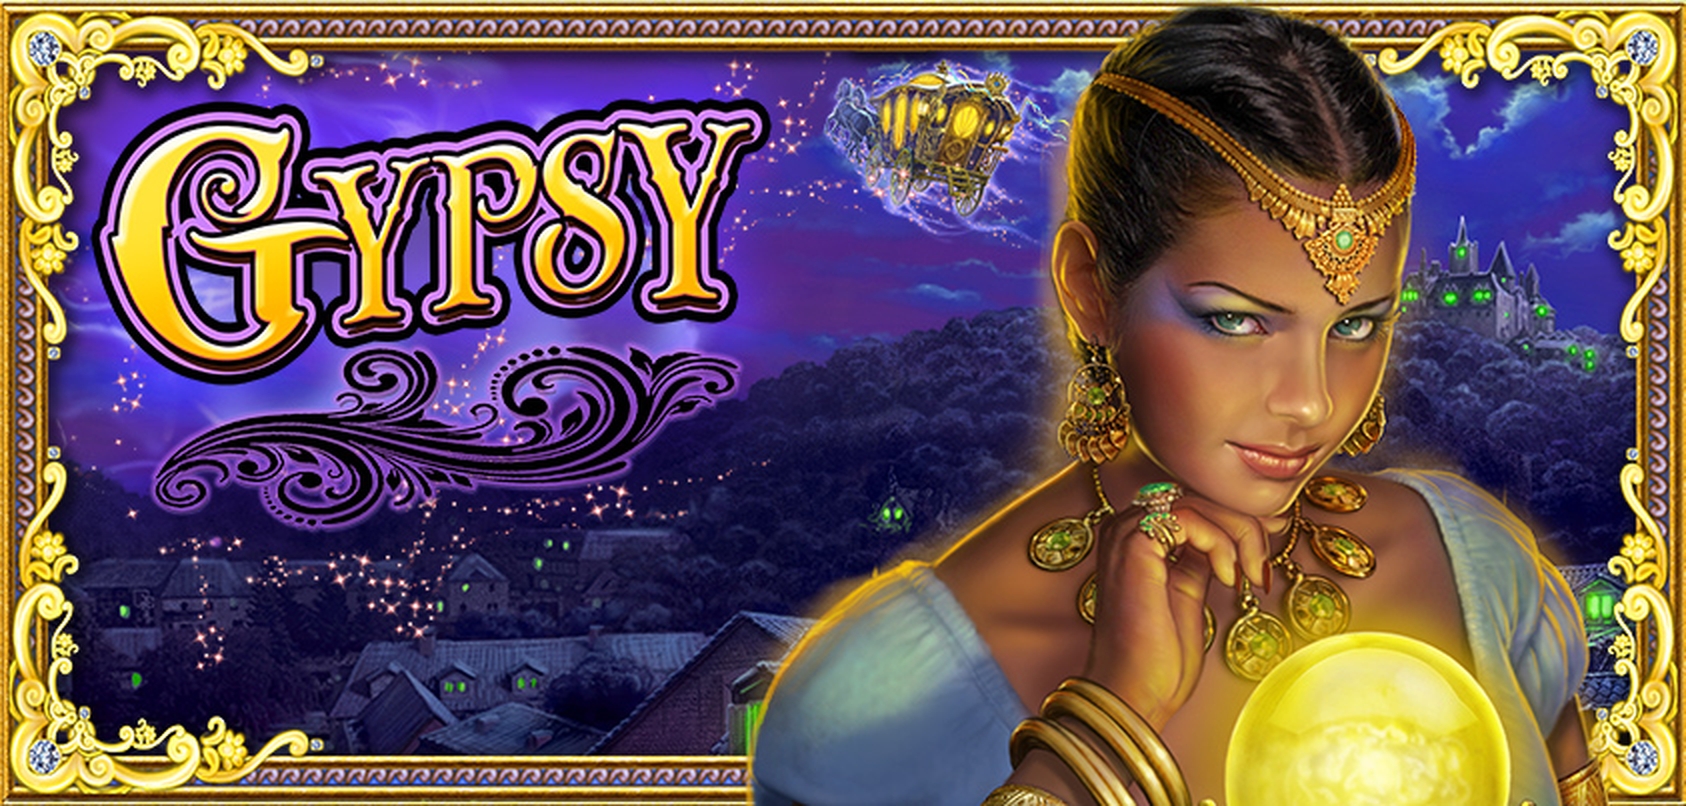 The Gypsy Online Slot Demo Game by High 5 Games